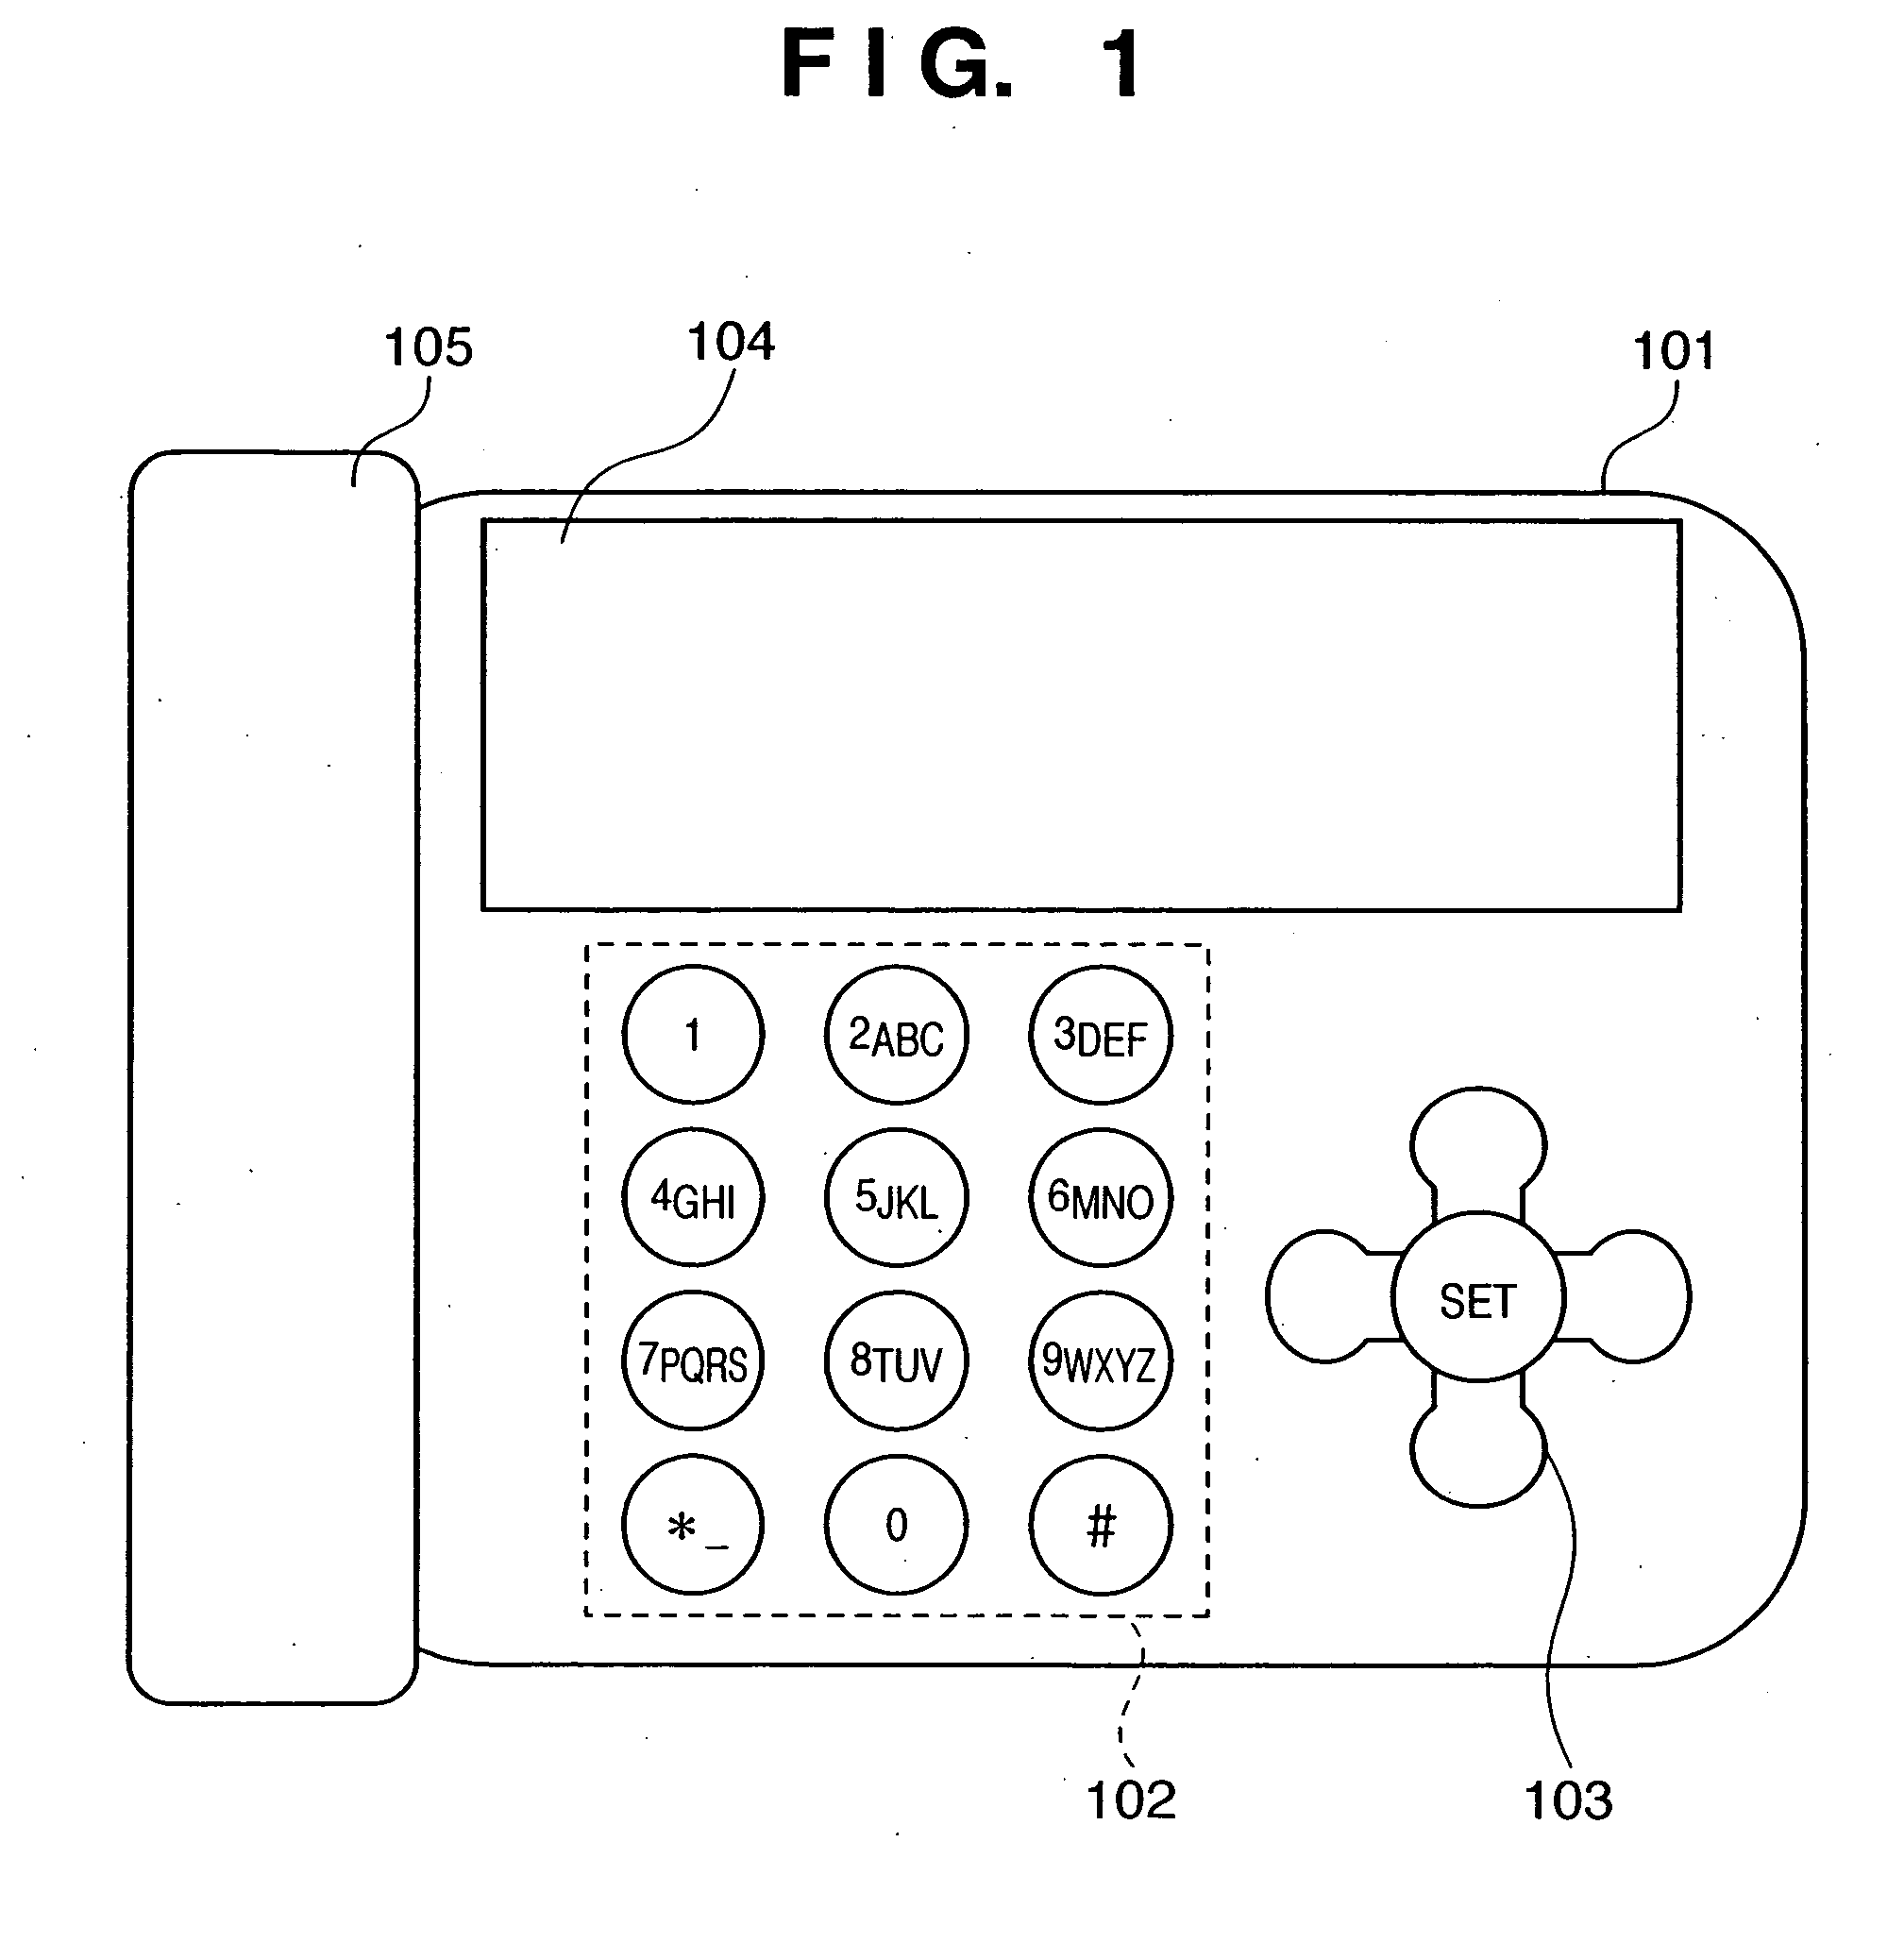 Character string input apparatus and method of controlling same